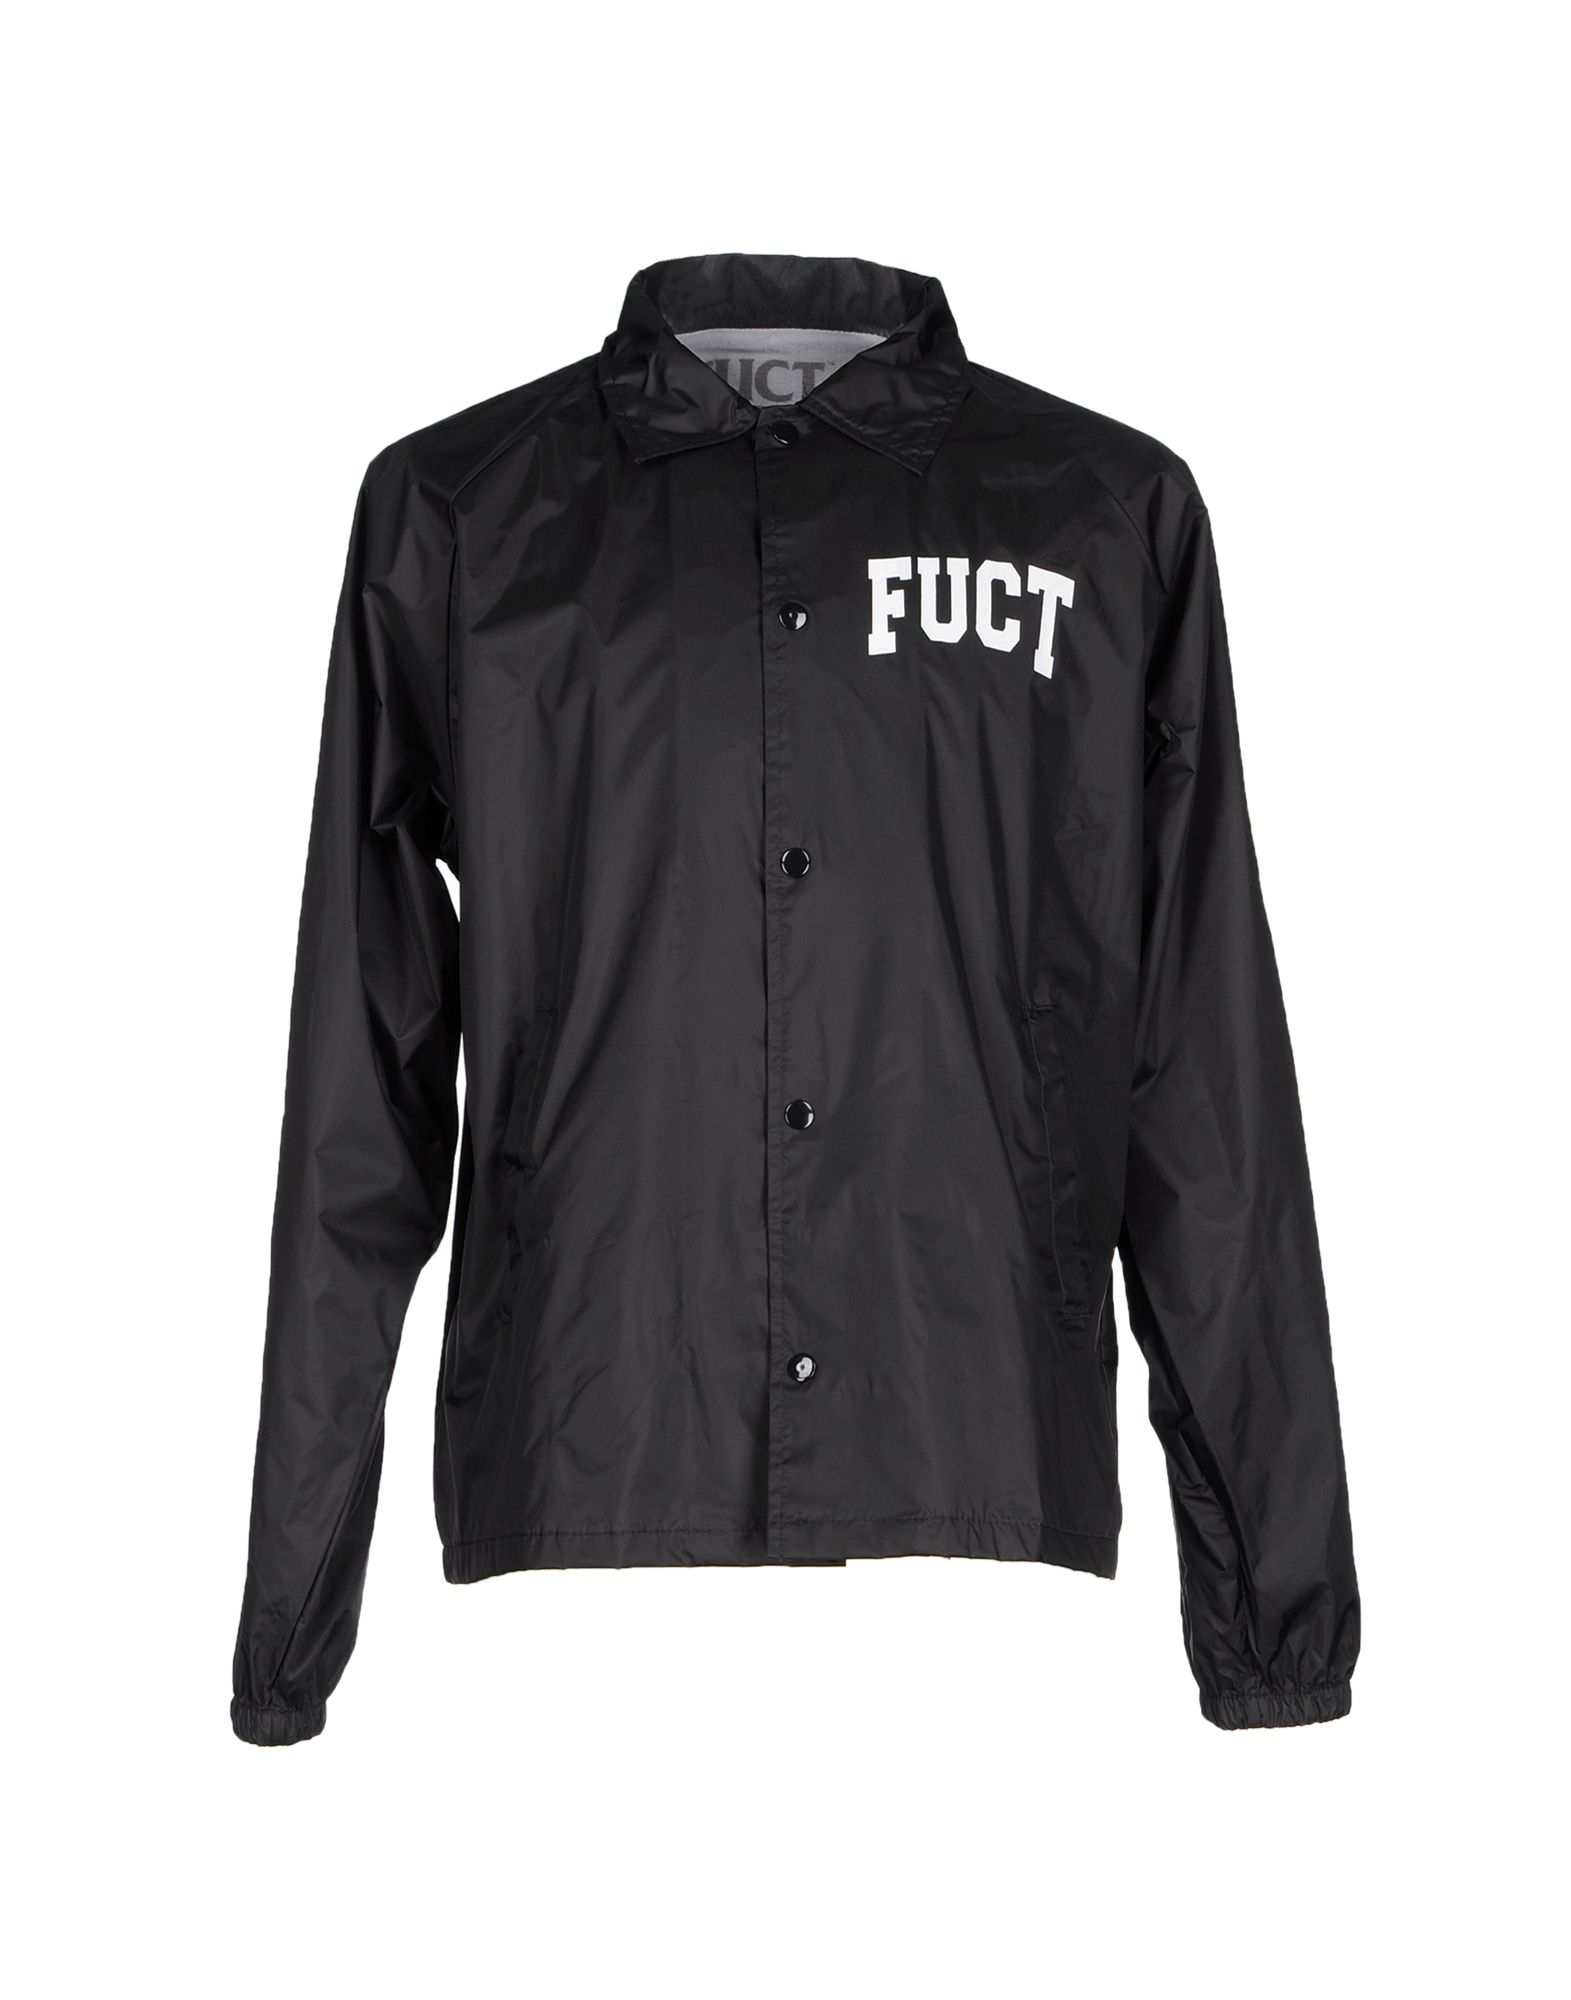 Lyst - Fuct Jacket in Black for Men1571 x 2000